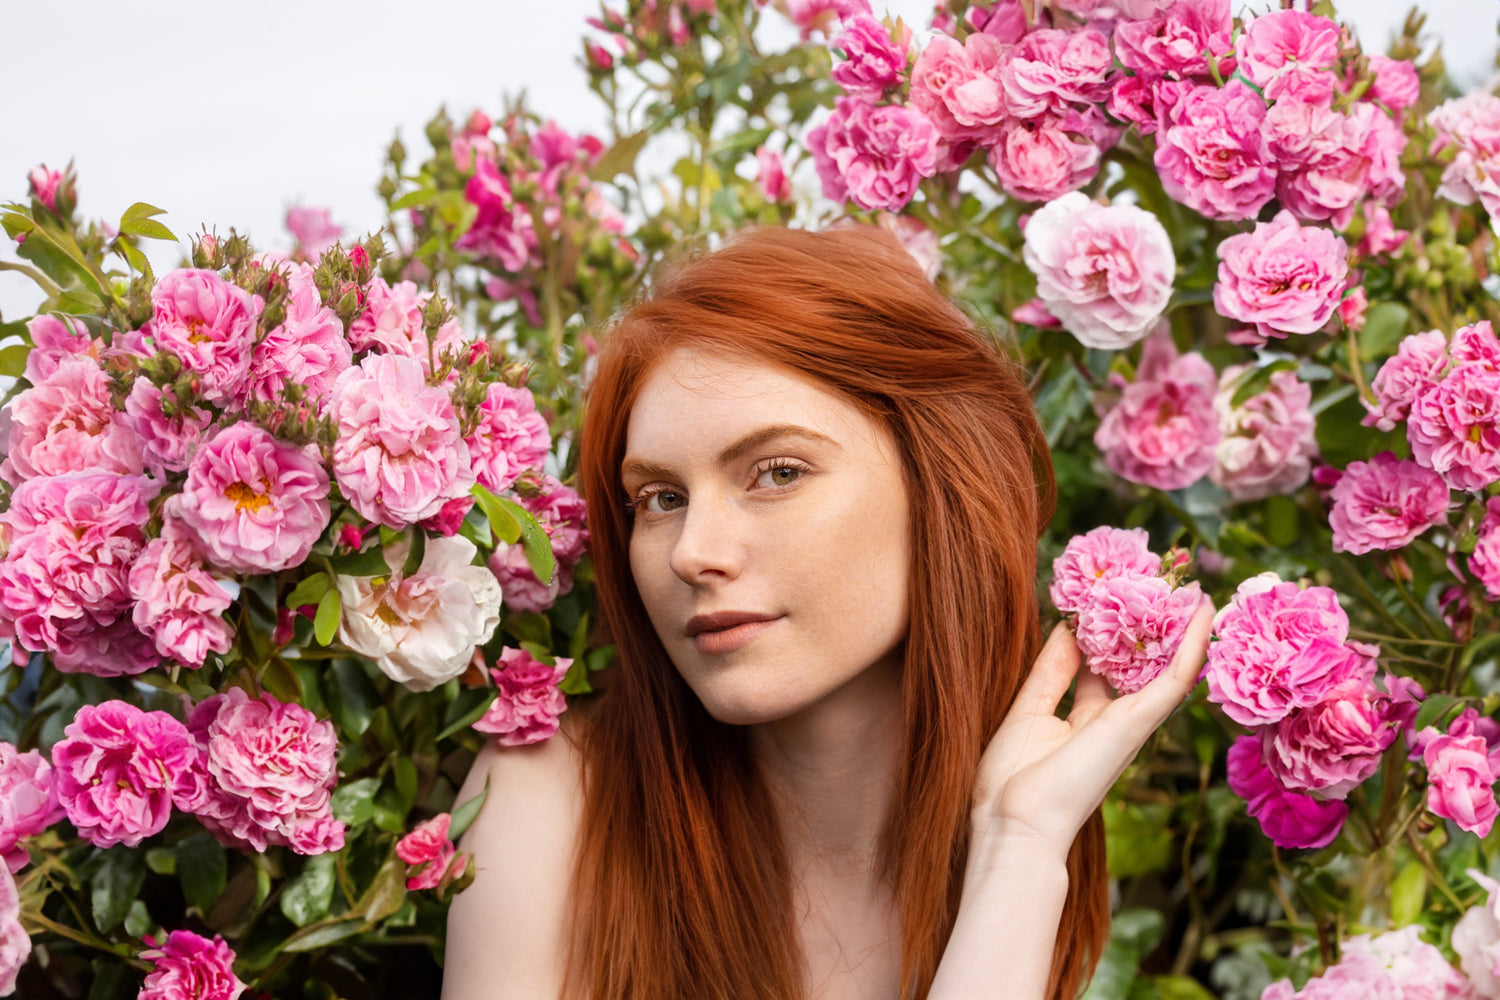 A woman with red hair is surrounded by Bulgarian roses.